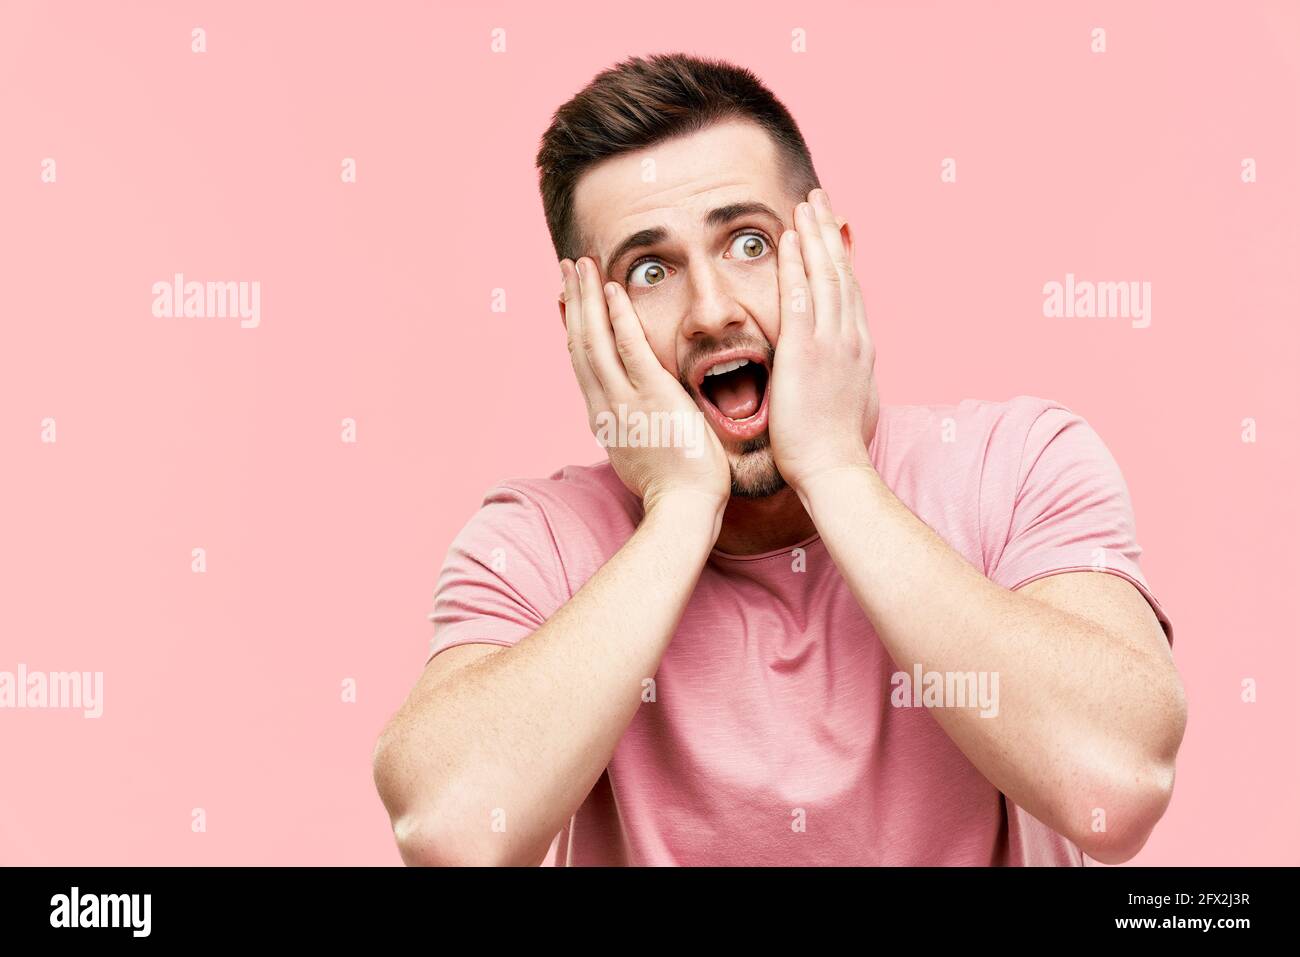 Close up portrait of shocked excited scared man with open mouth panicking over pink background. Face expression, omg, emotions concept. Stock Photo